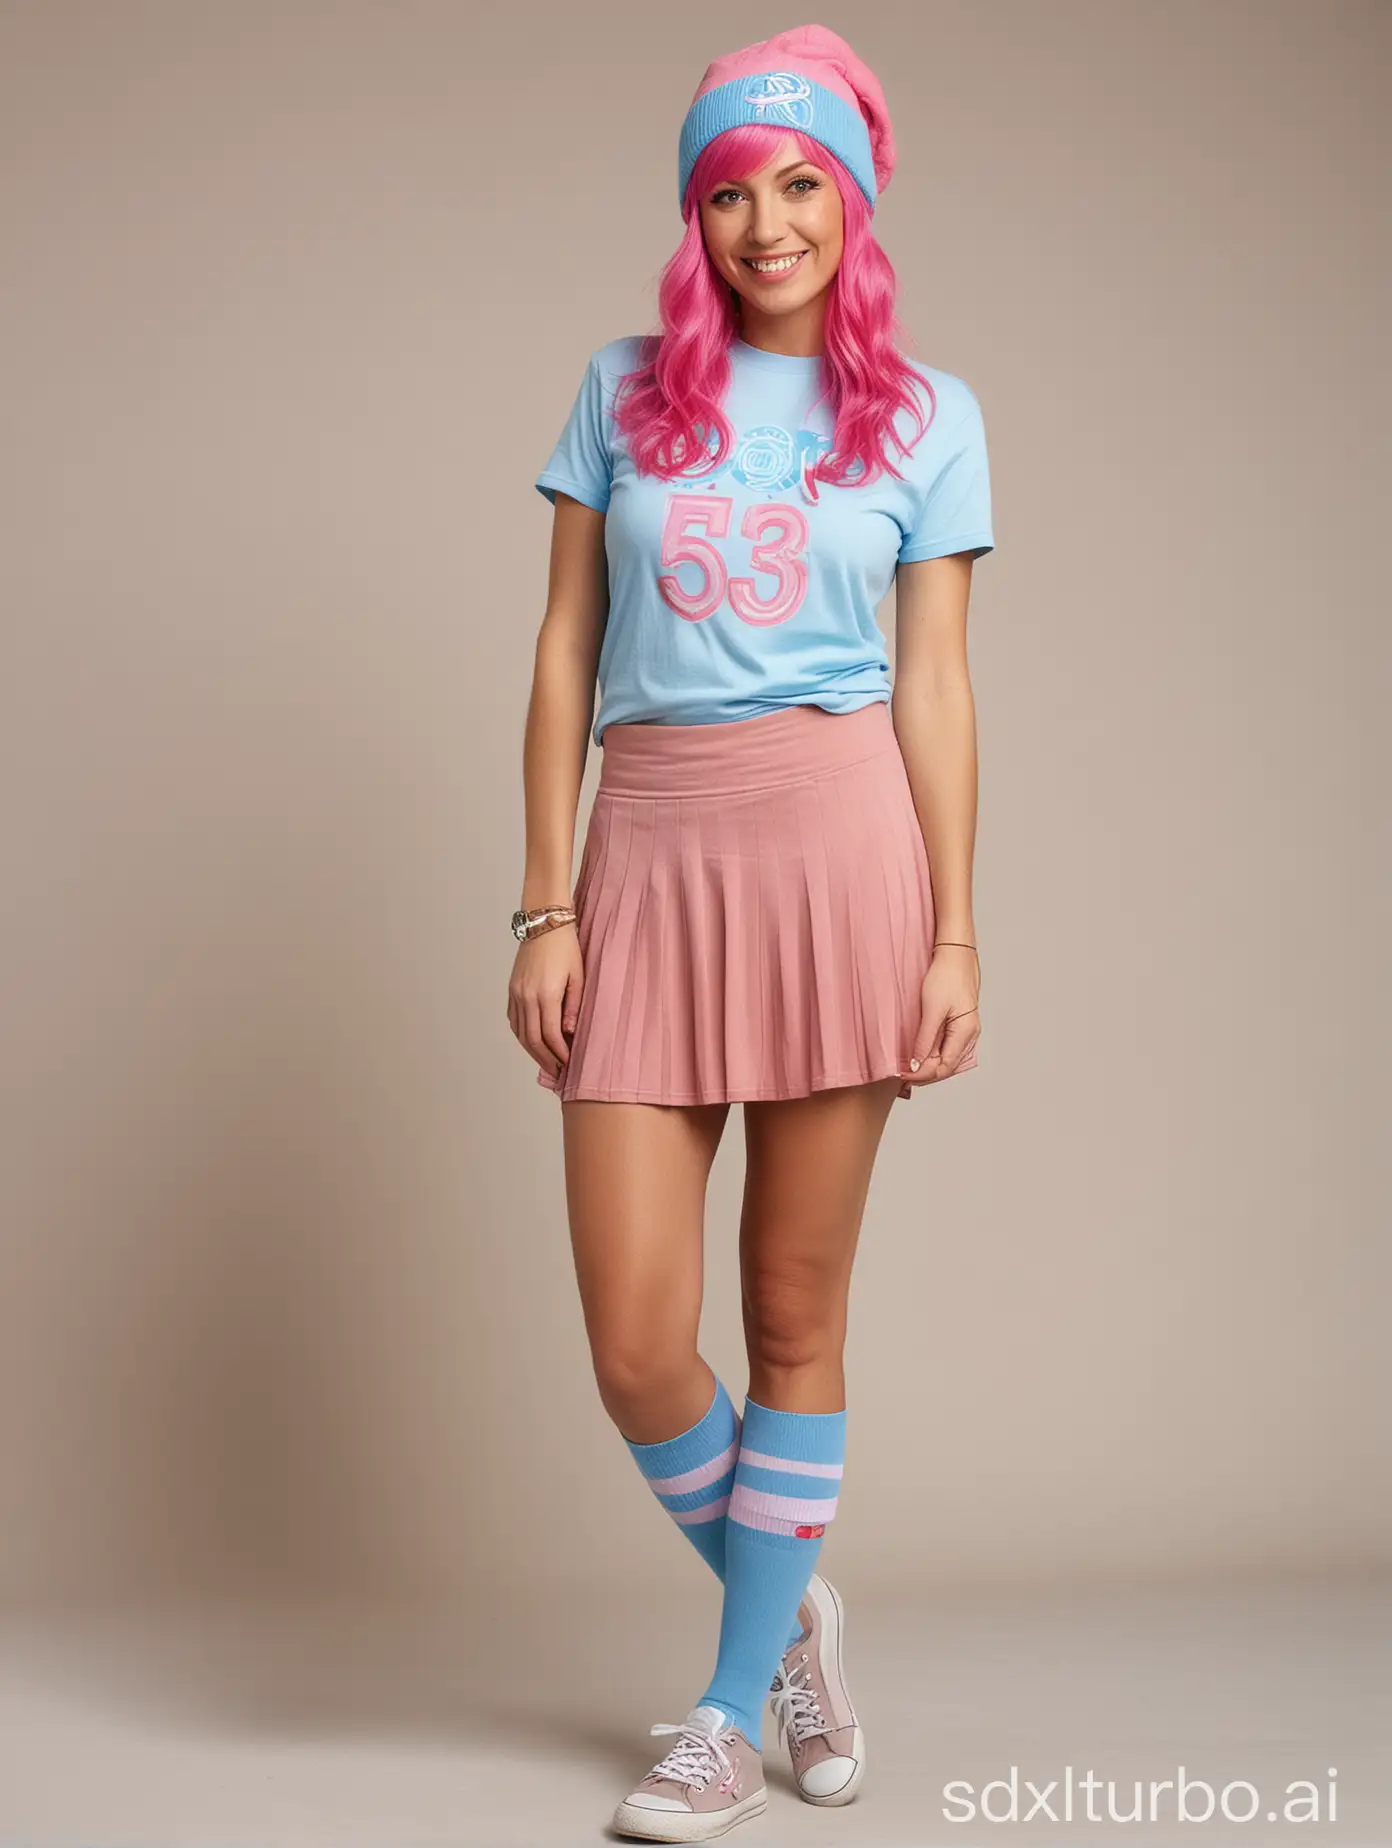 A cool middle aged Swiss woman; 53 years old, wearing a long bright pink hair, dark brown eyes; wearing a light blue beanie cap hat on her head, dressed in a short light beige top adorned with a teenager symbol, a short dark brown knee height skirt and wearing long dark brown socks, black sneakers, with a smile in a full body standing photo.